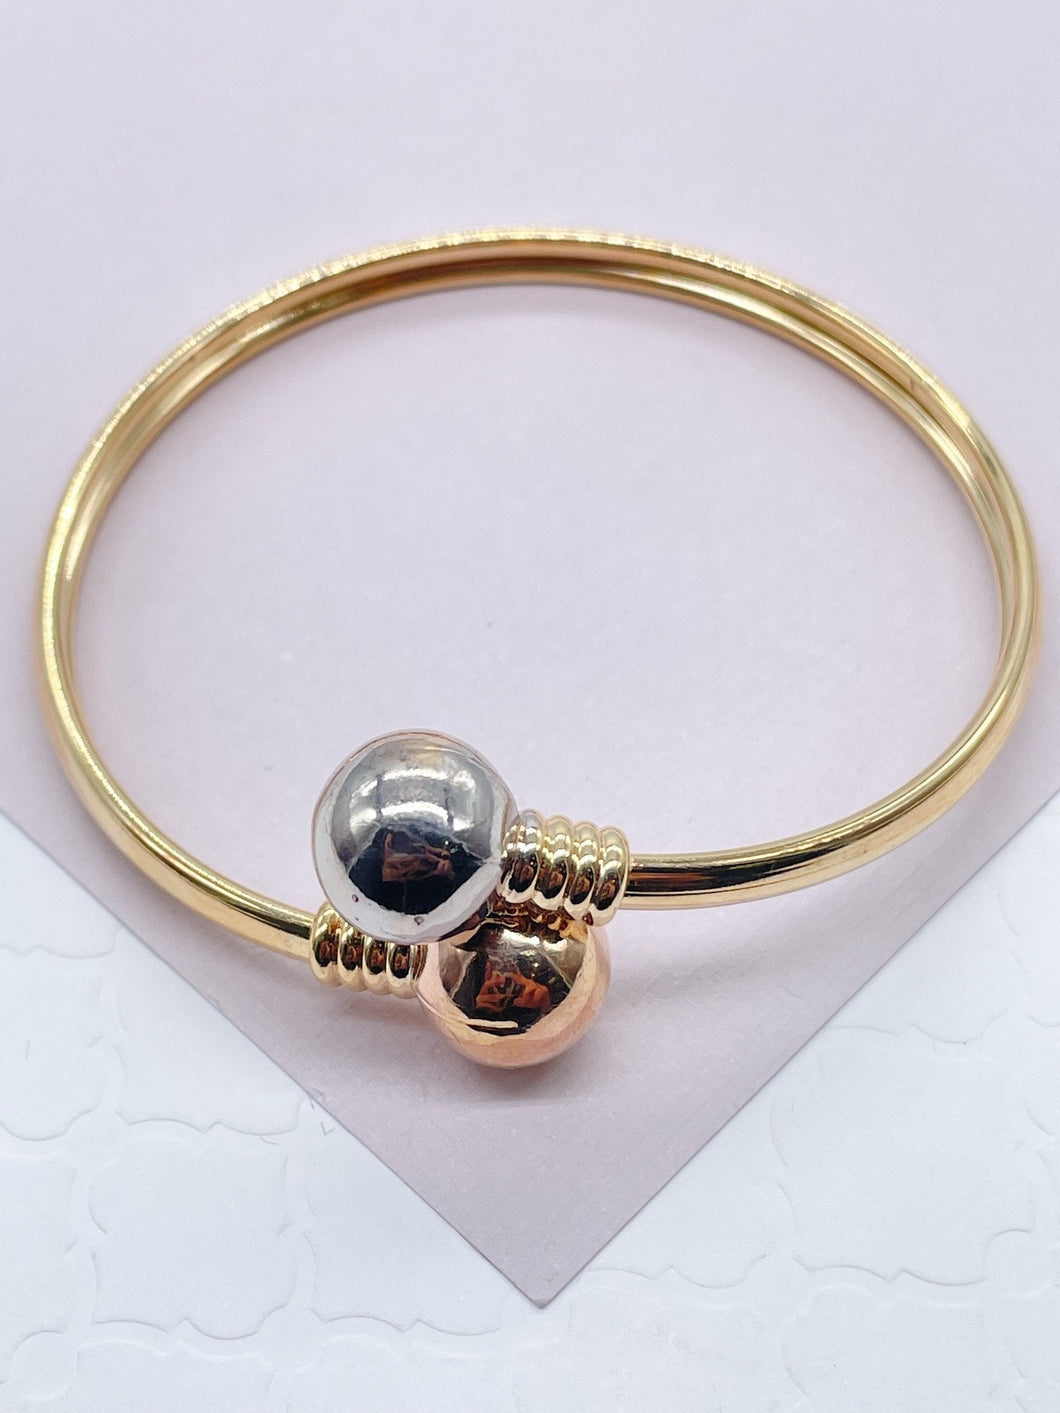 18k Gold Filled Two Ball Plain Tricolor Bangle  Bracelet Jewelry